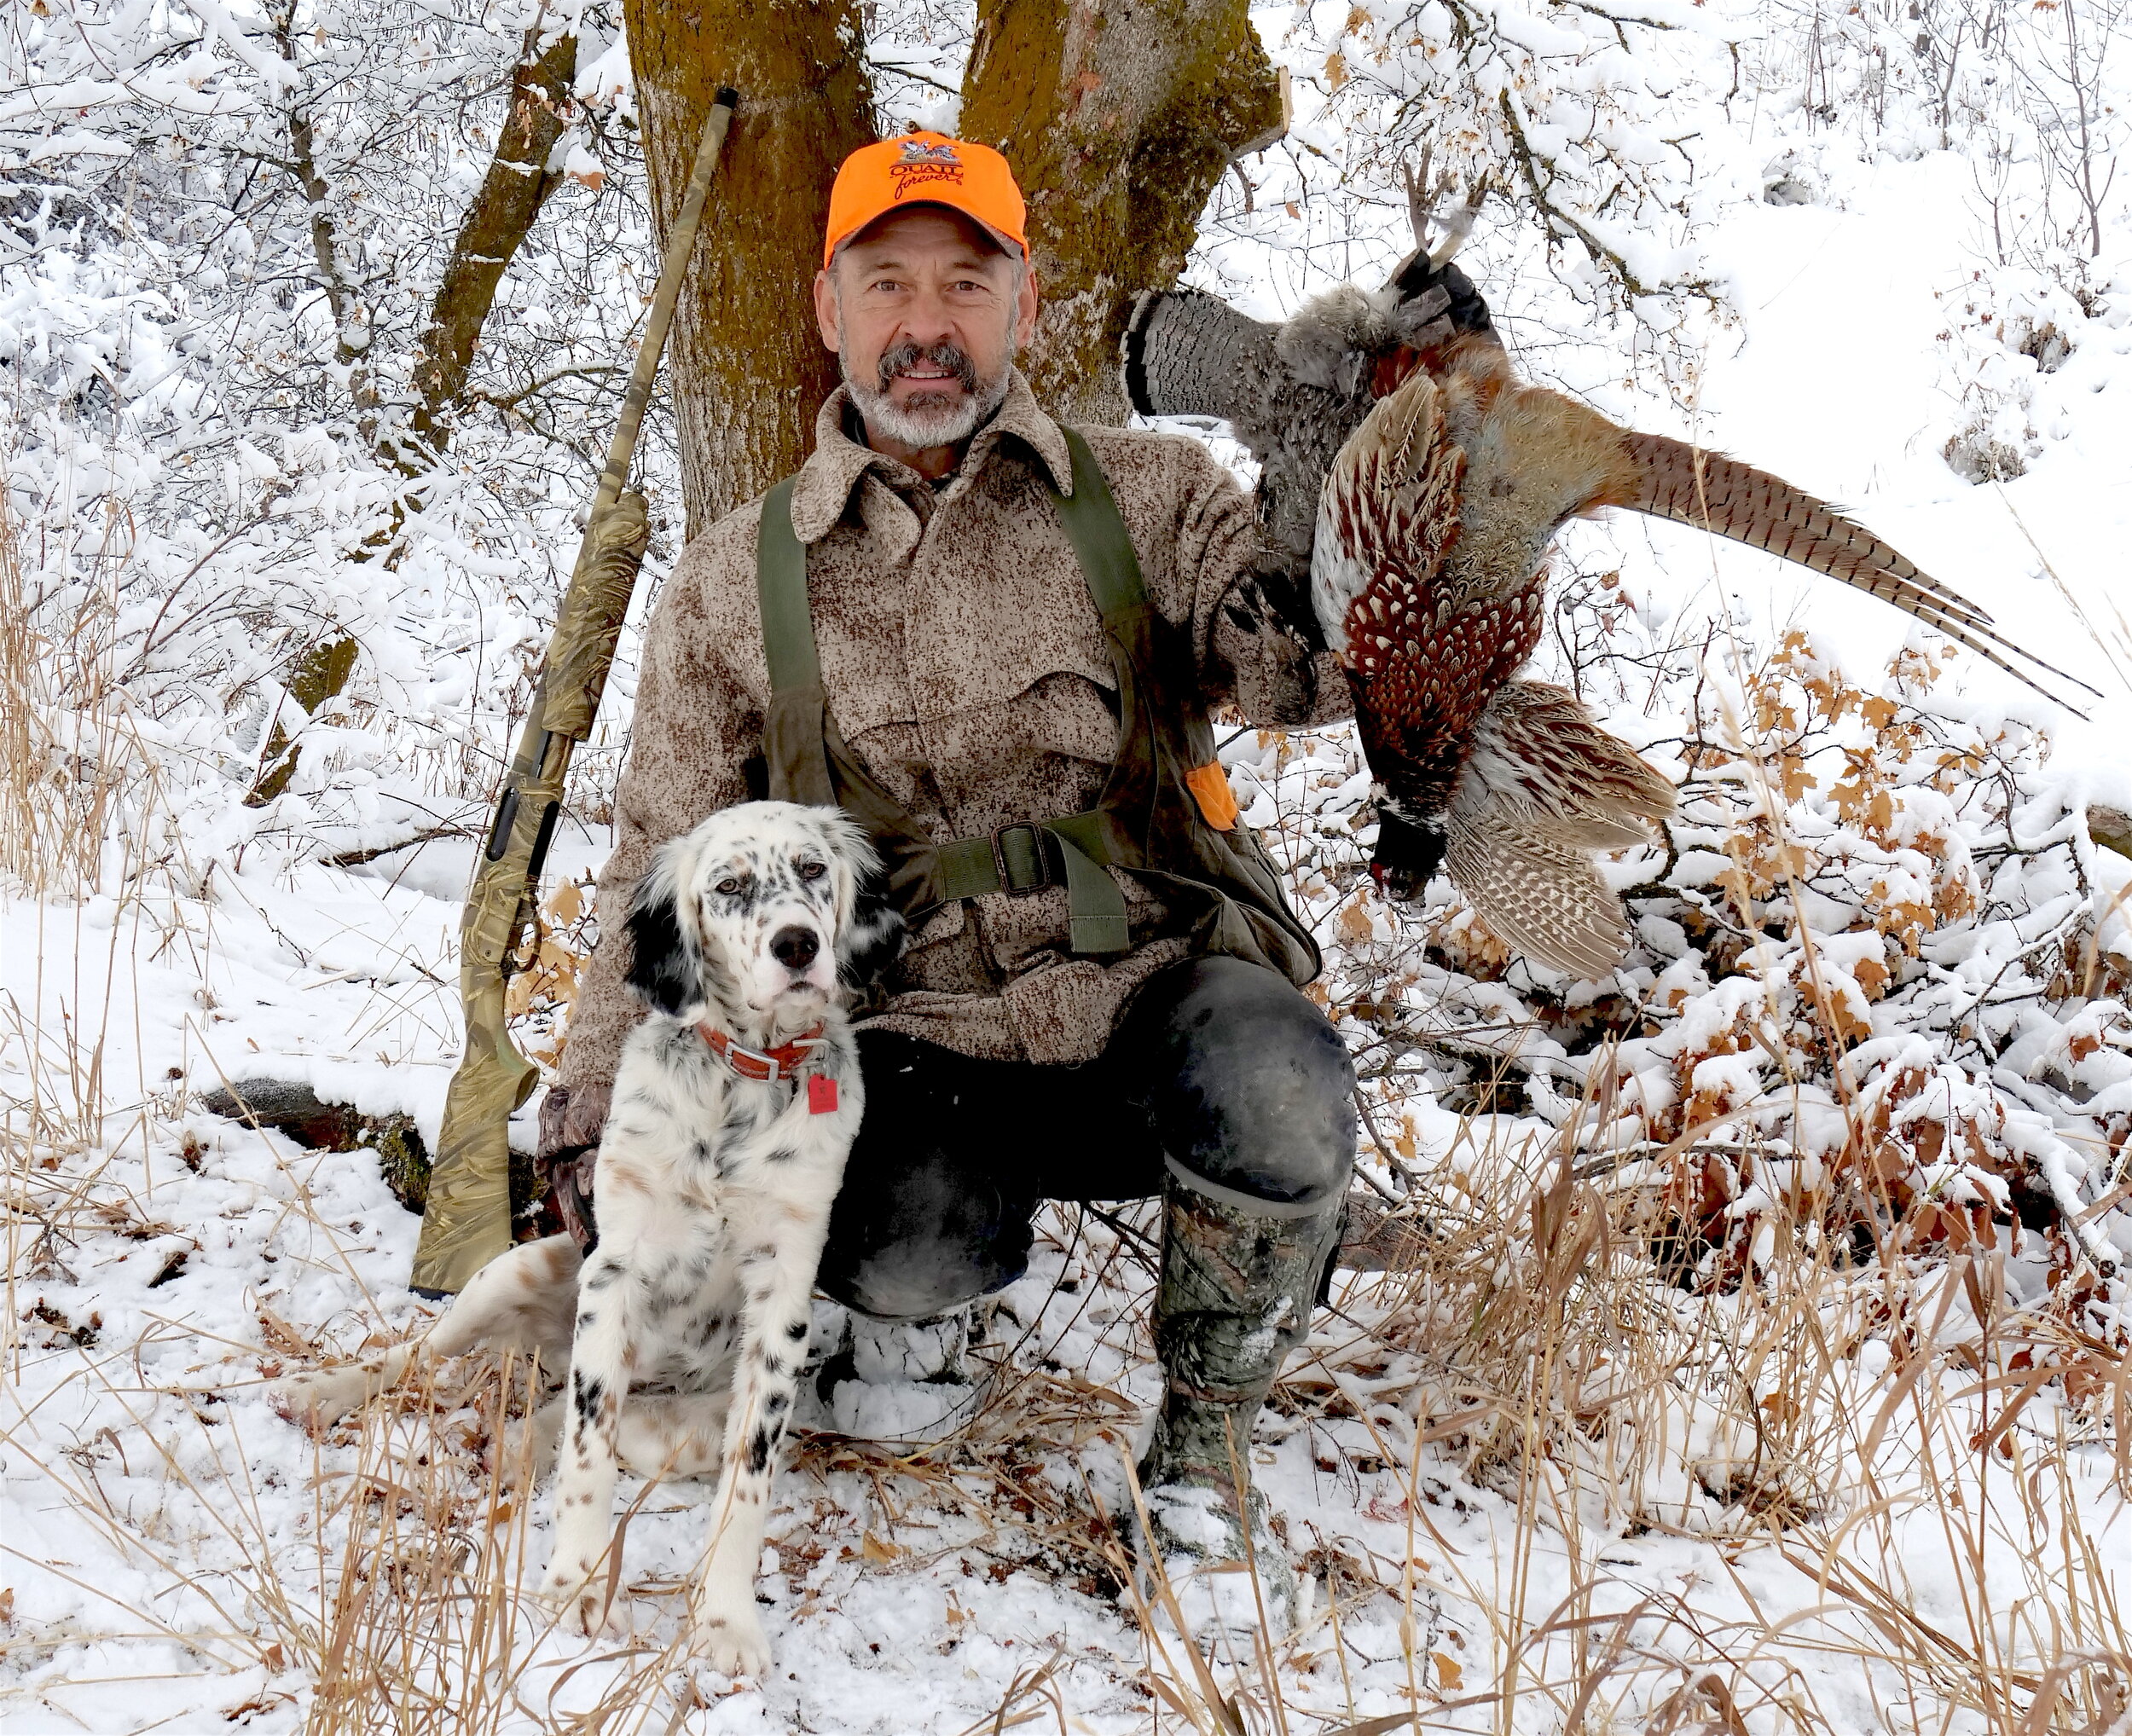 Image shows hunter and dog with a brace of upland game birds, pheasant and ruffed grouse, examples of sustainable conservation hunting